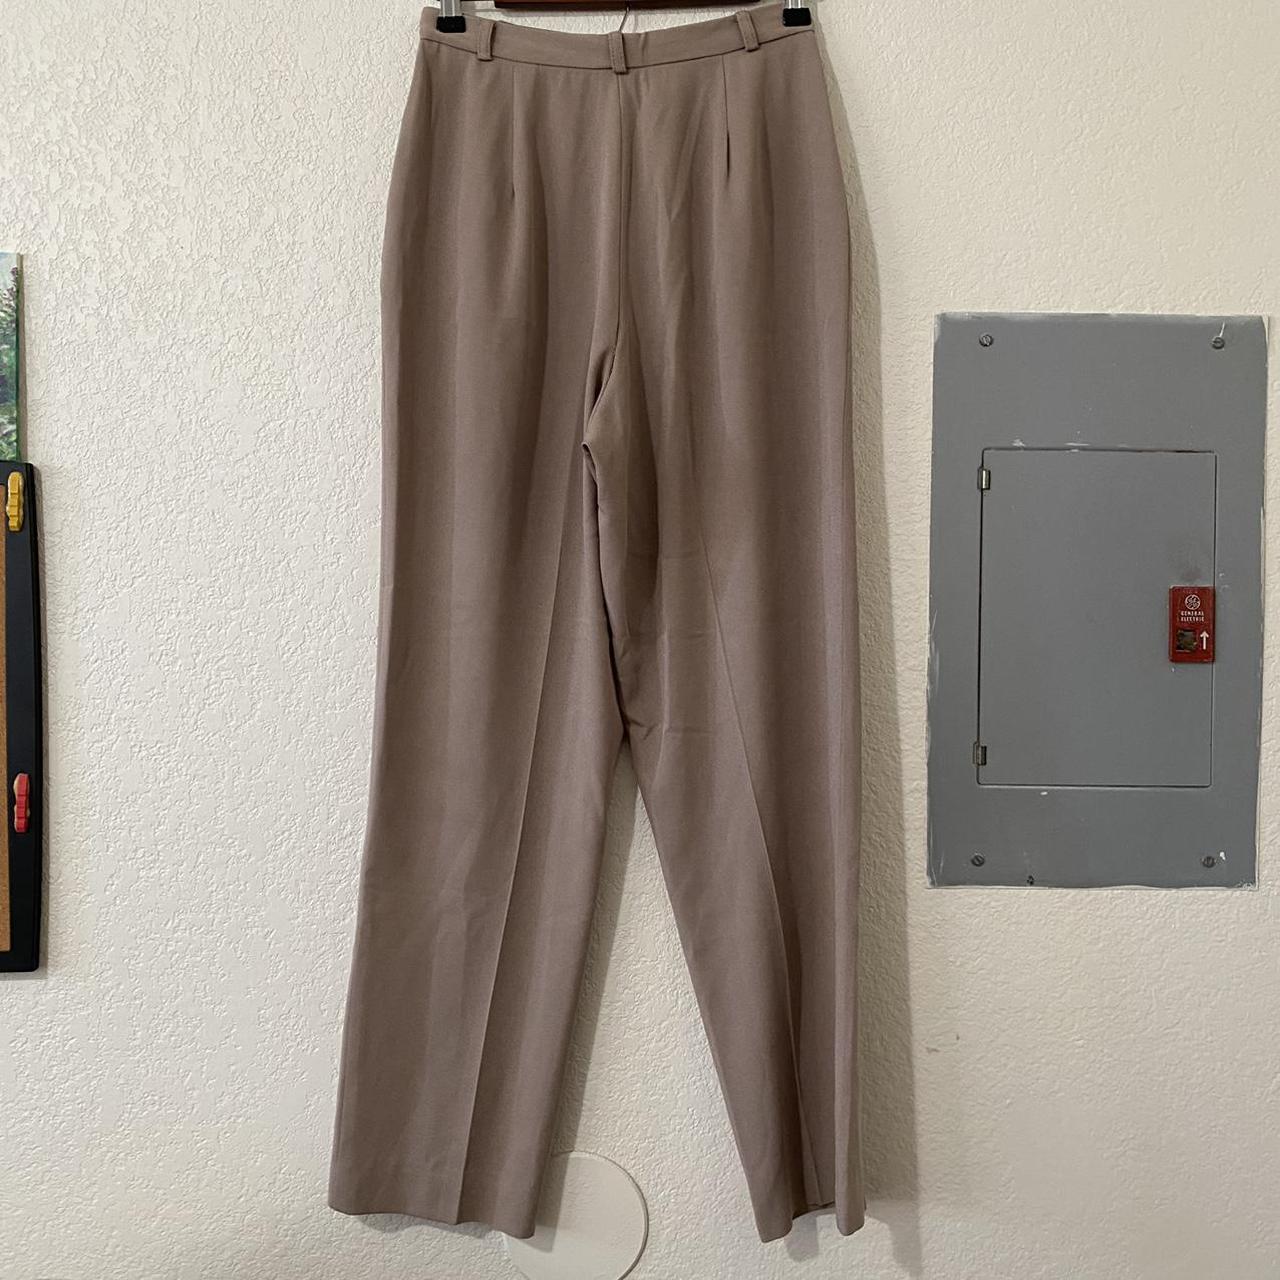 Product Image 3 - Beige Dress Pants ✔️

-size: tagged